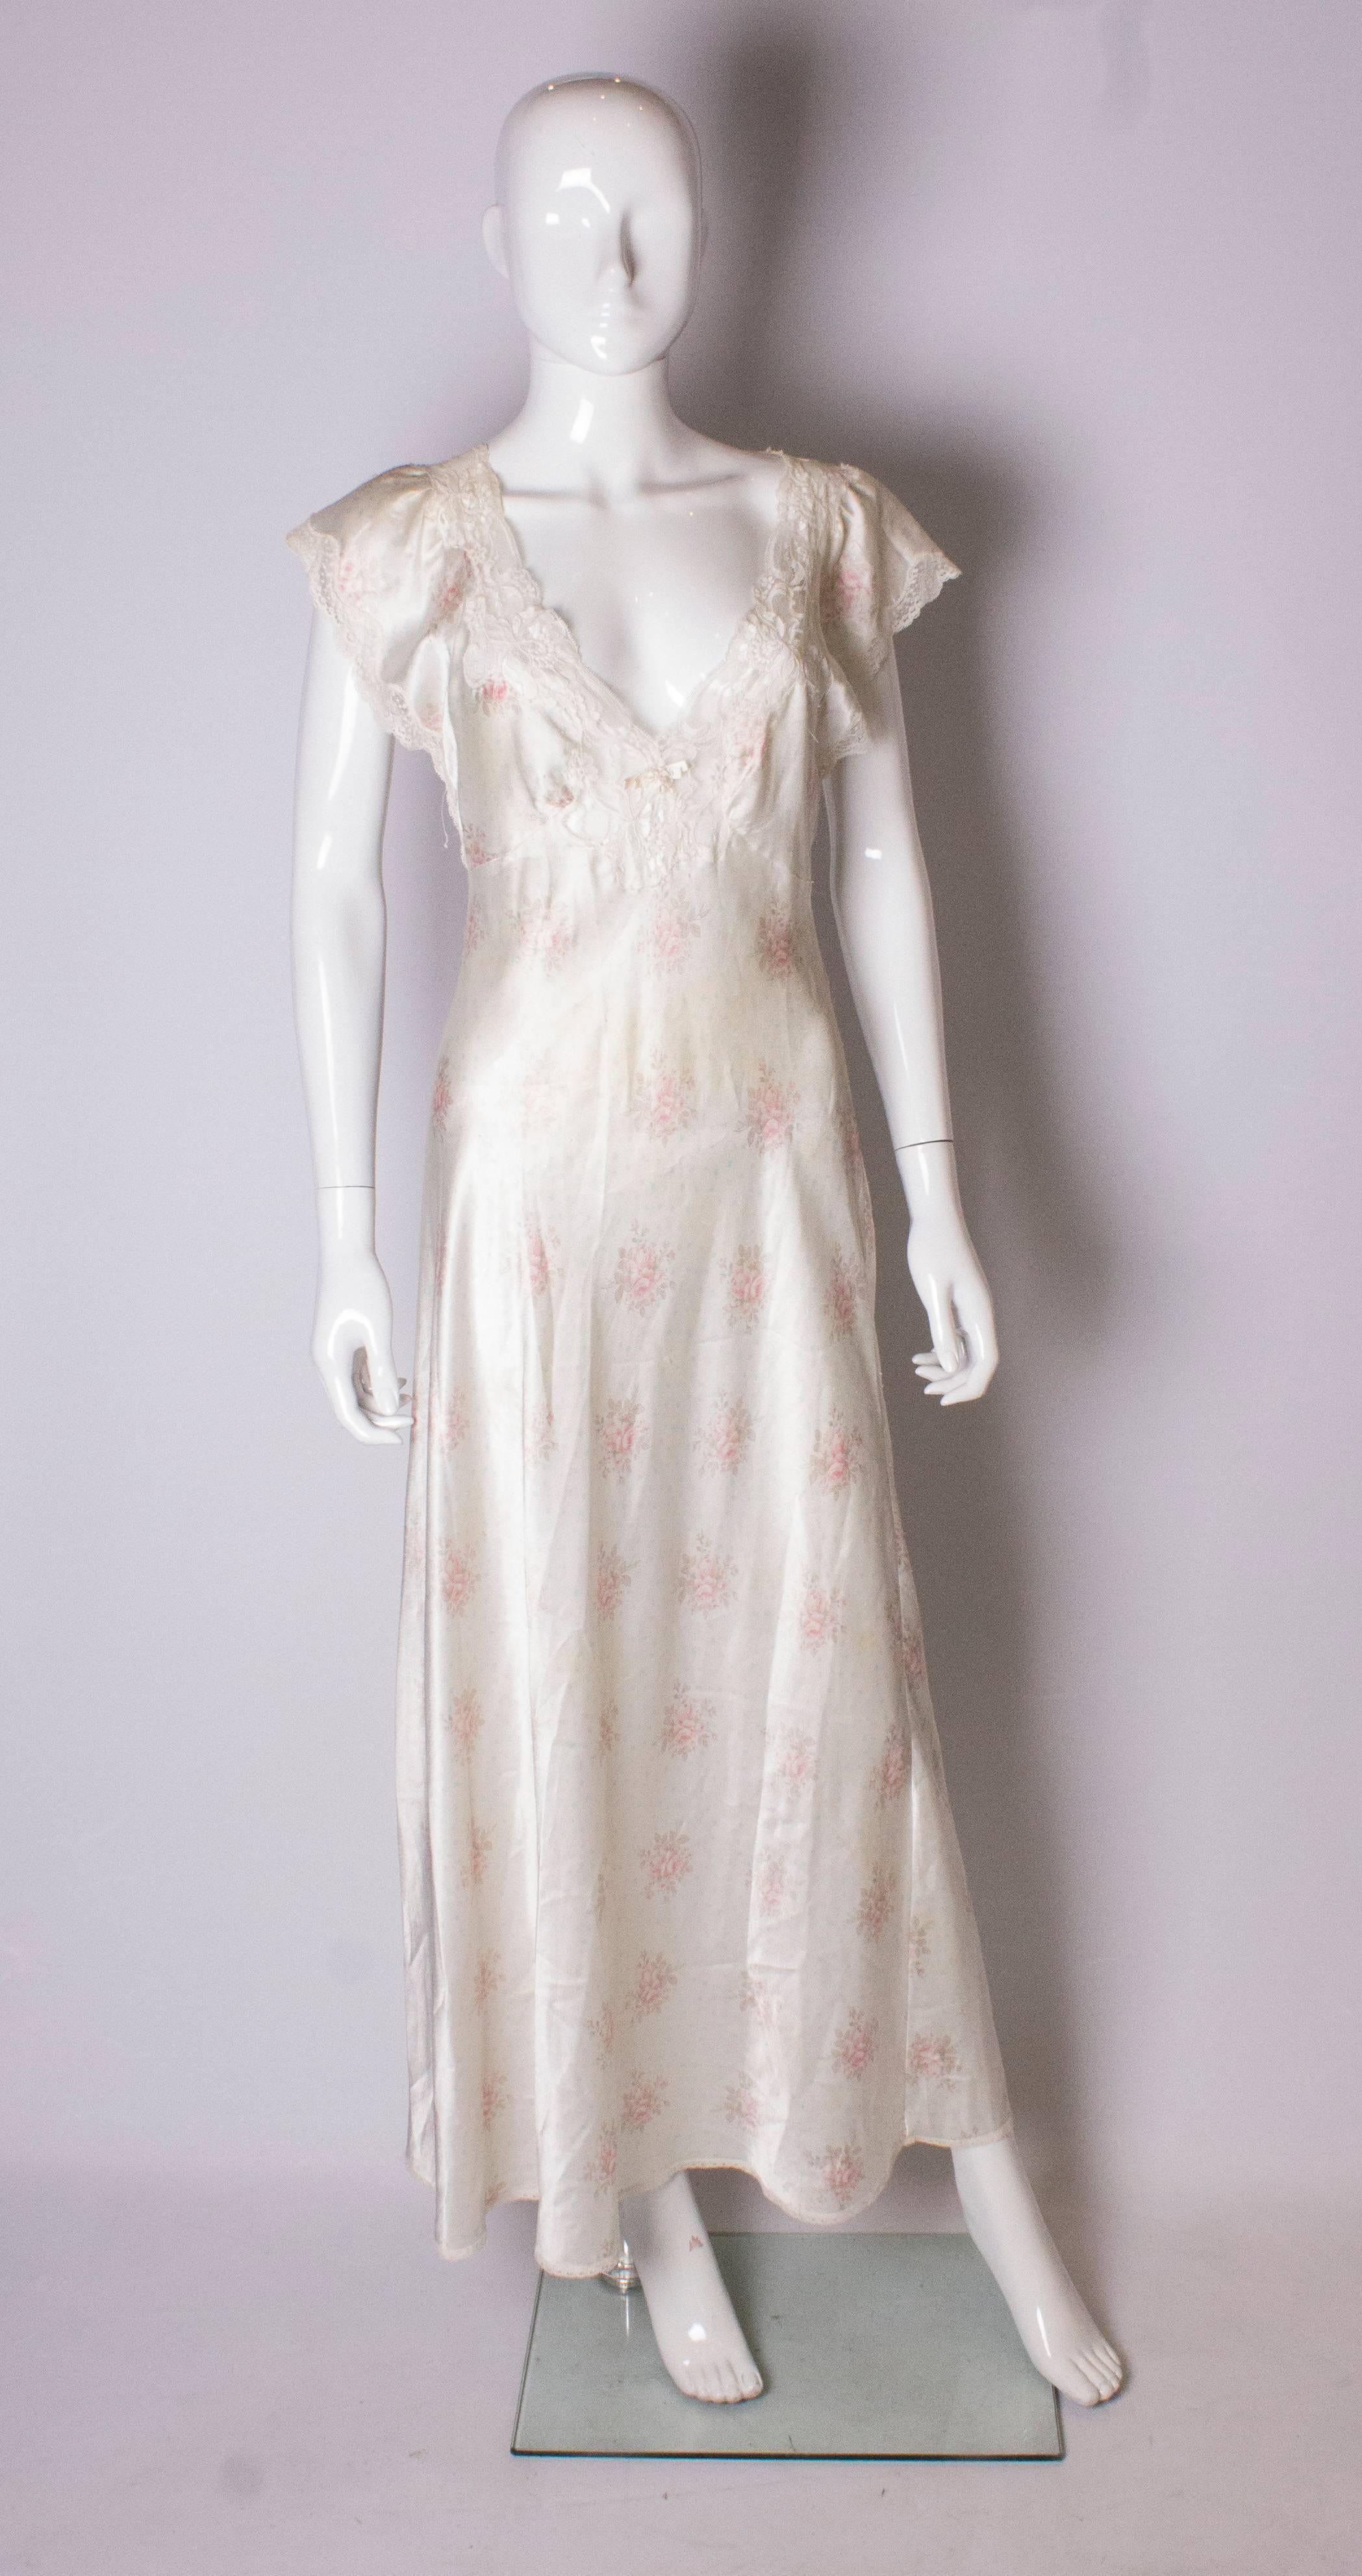 A pretty nightdress by Christian Dior. The fabric is a silky satin with an ivory background with blue dots and a rose print. it has a v neckline with lace trim ,and ;ace on the hem and cuffs.